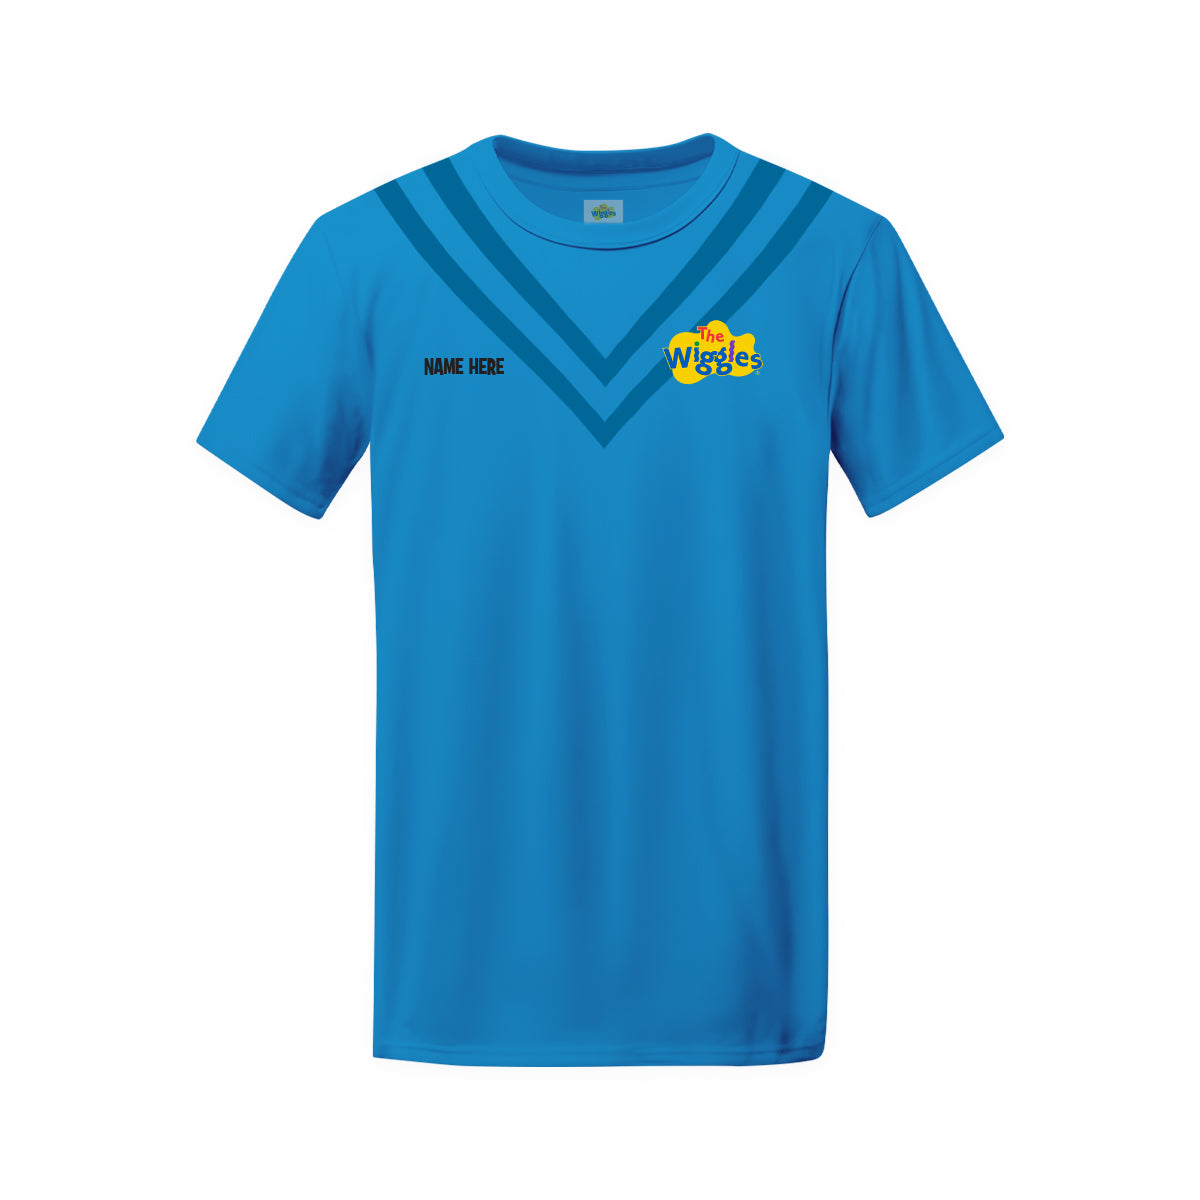 Personalised The Wiggles Childrens Costume T-shirt